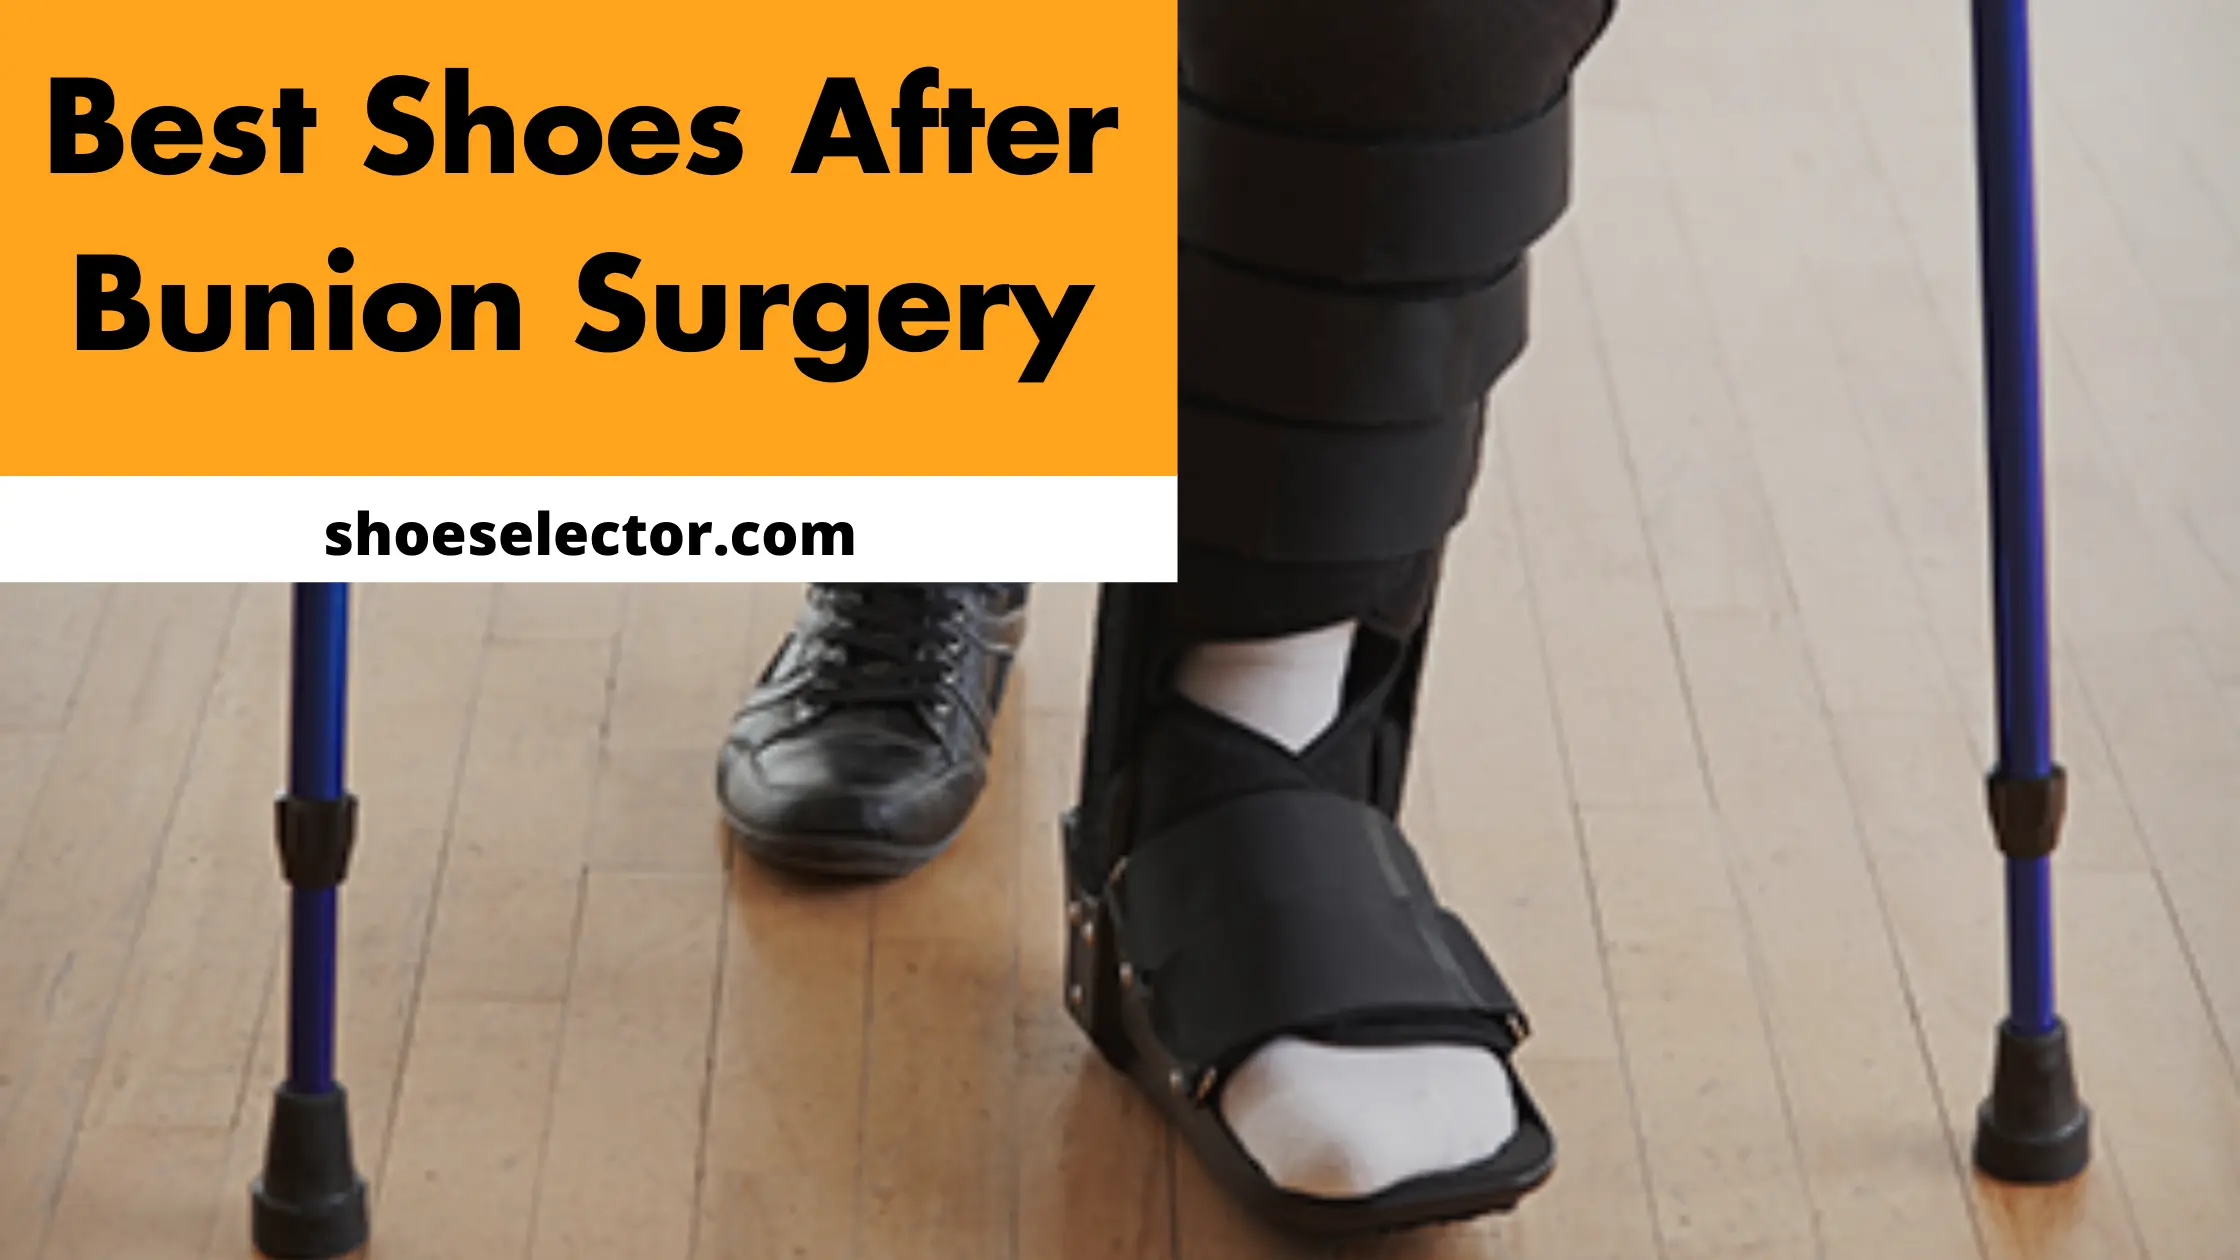 Best Shoes After Bunion Surgery With Products Comparison